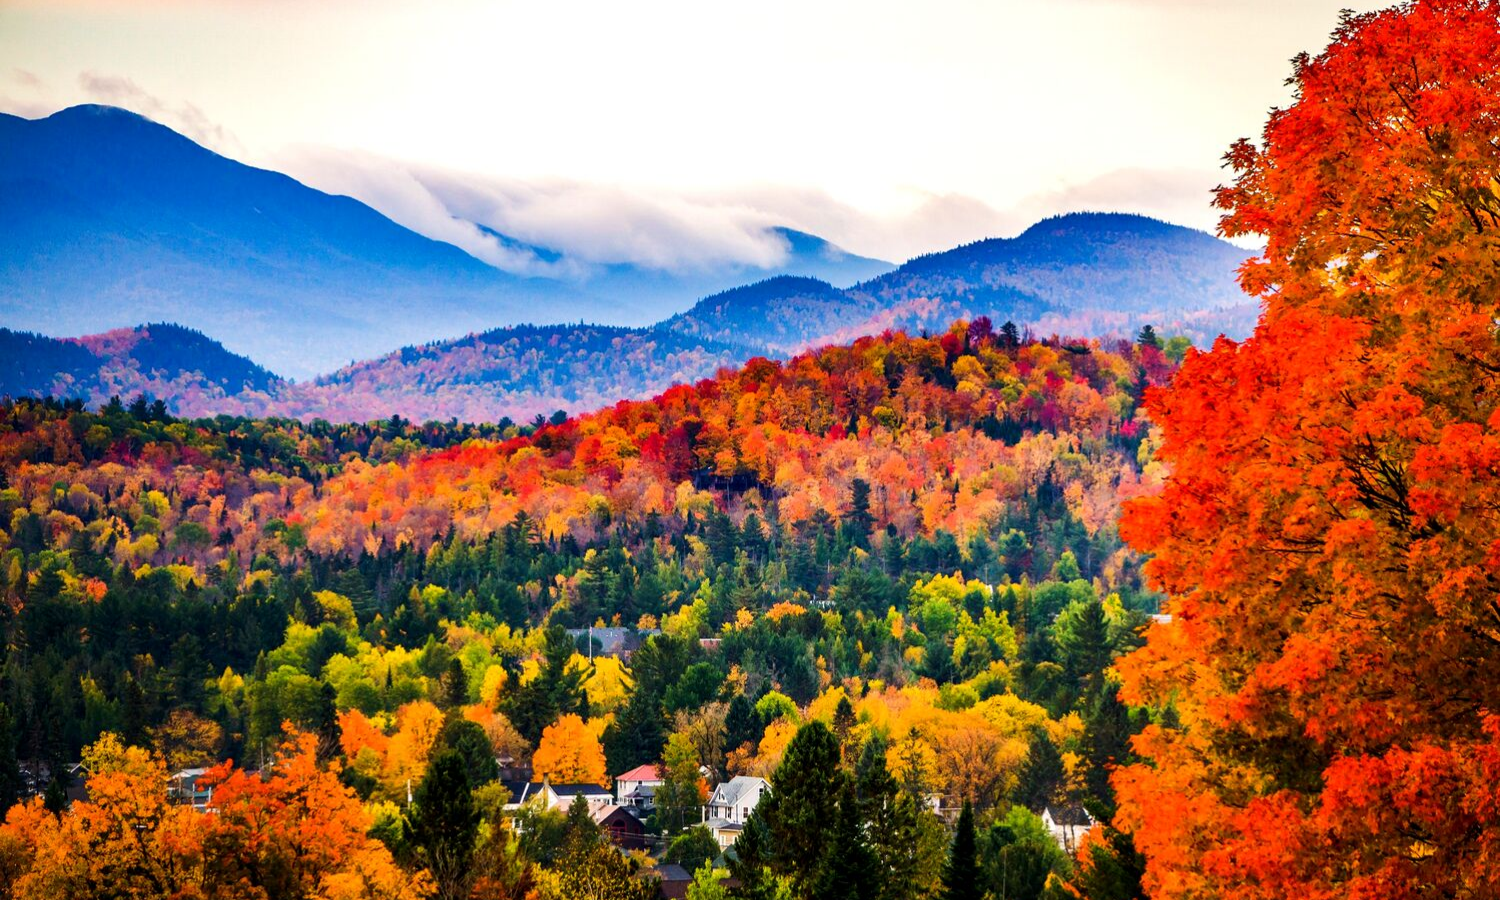 Photograph of a misty mountainous scene with red leaved trees. 